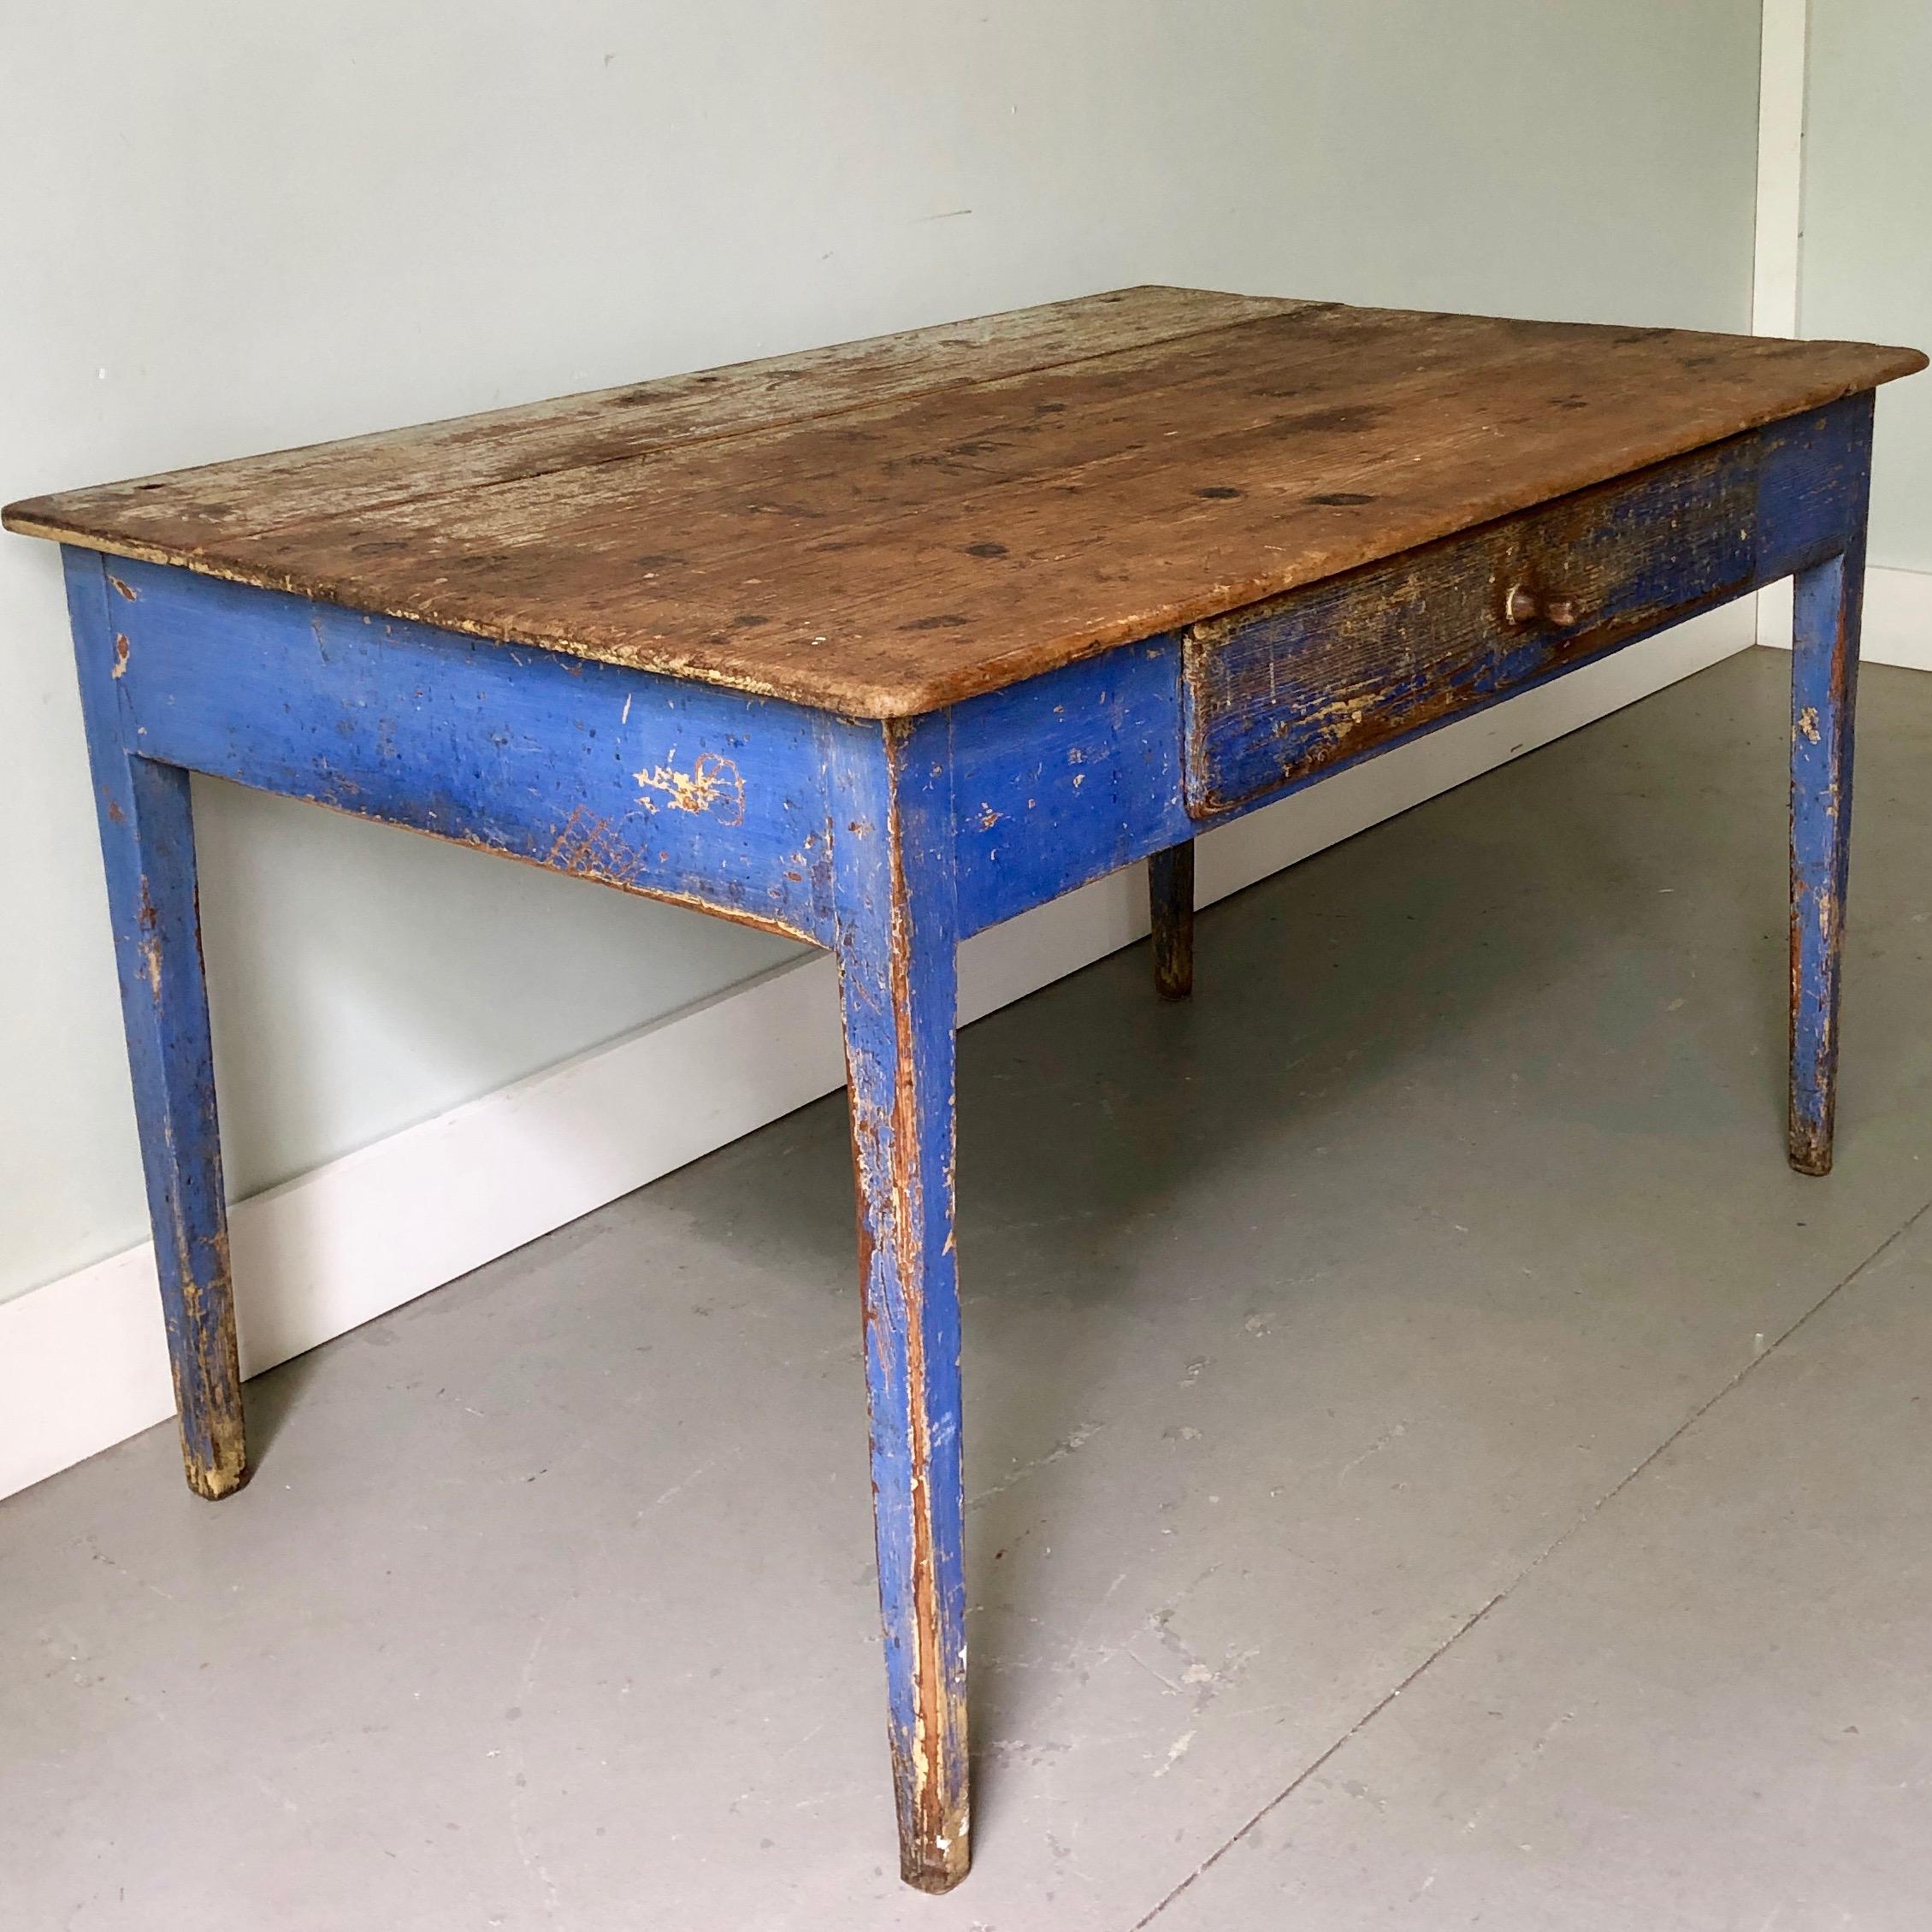 19th century large Swedish painted table or desk in old brilliant blue patina with one drawer and wooden natural pine top.
Sweden, circa 1810.